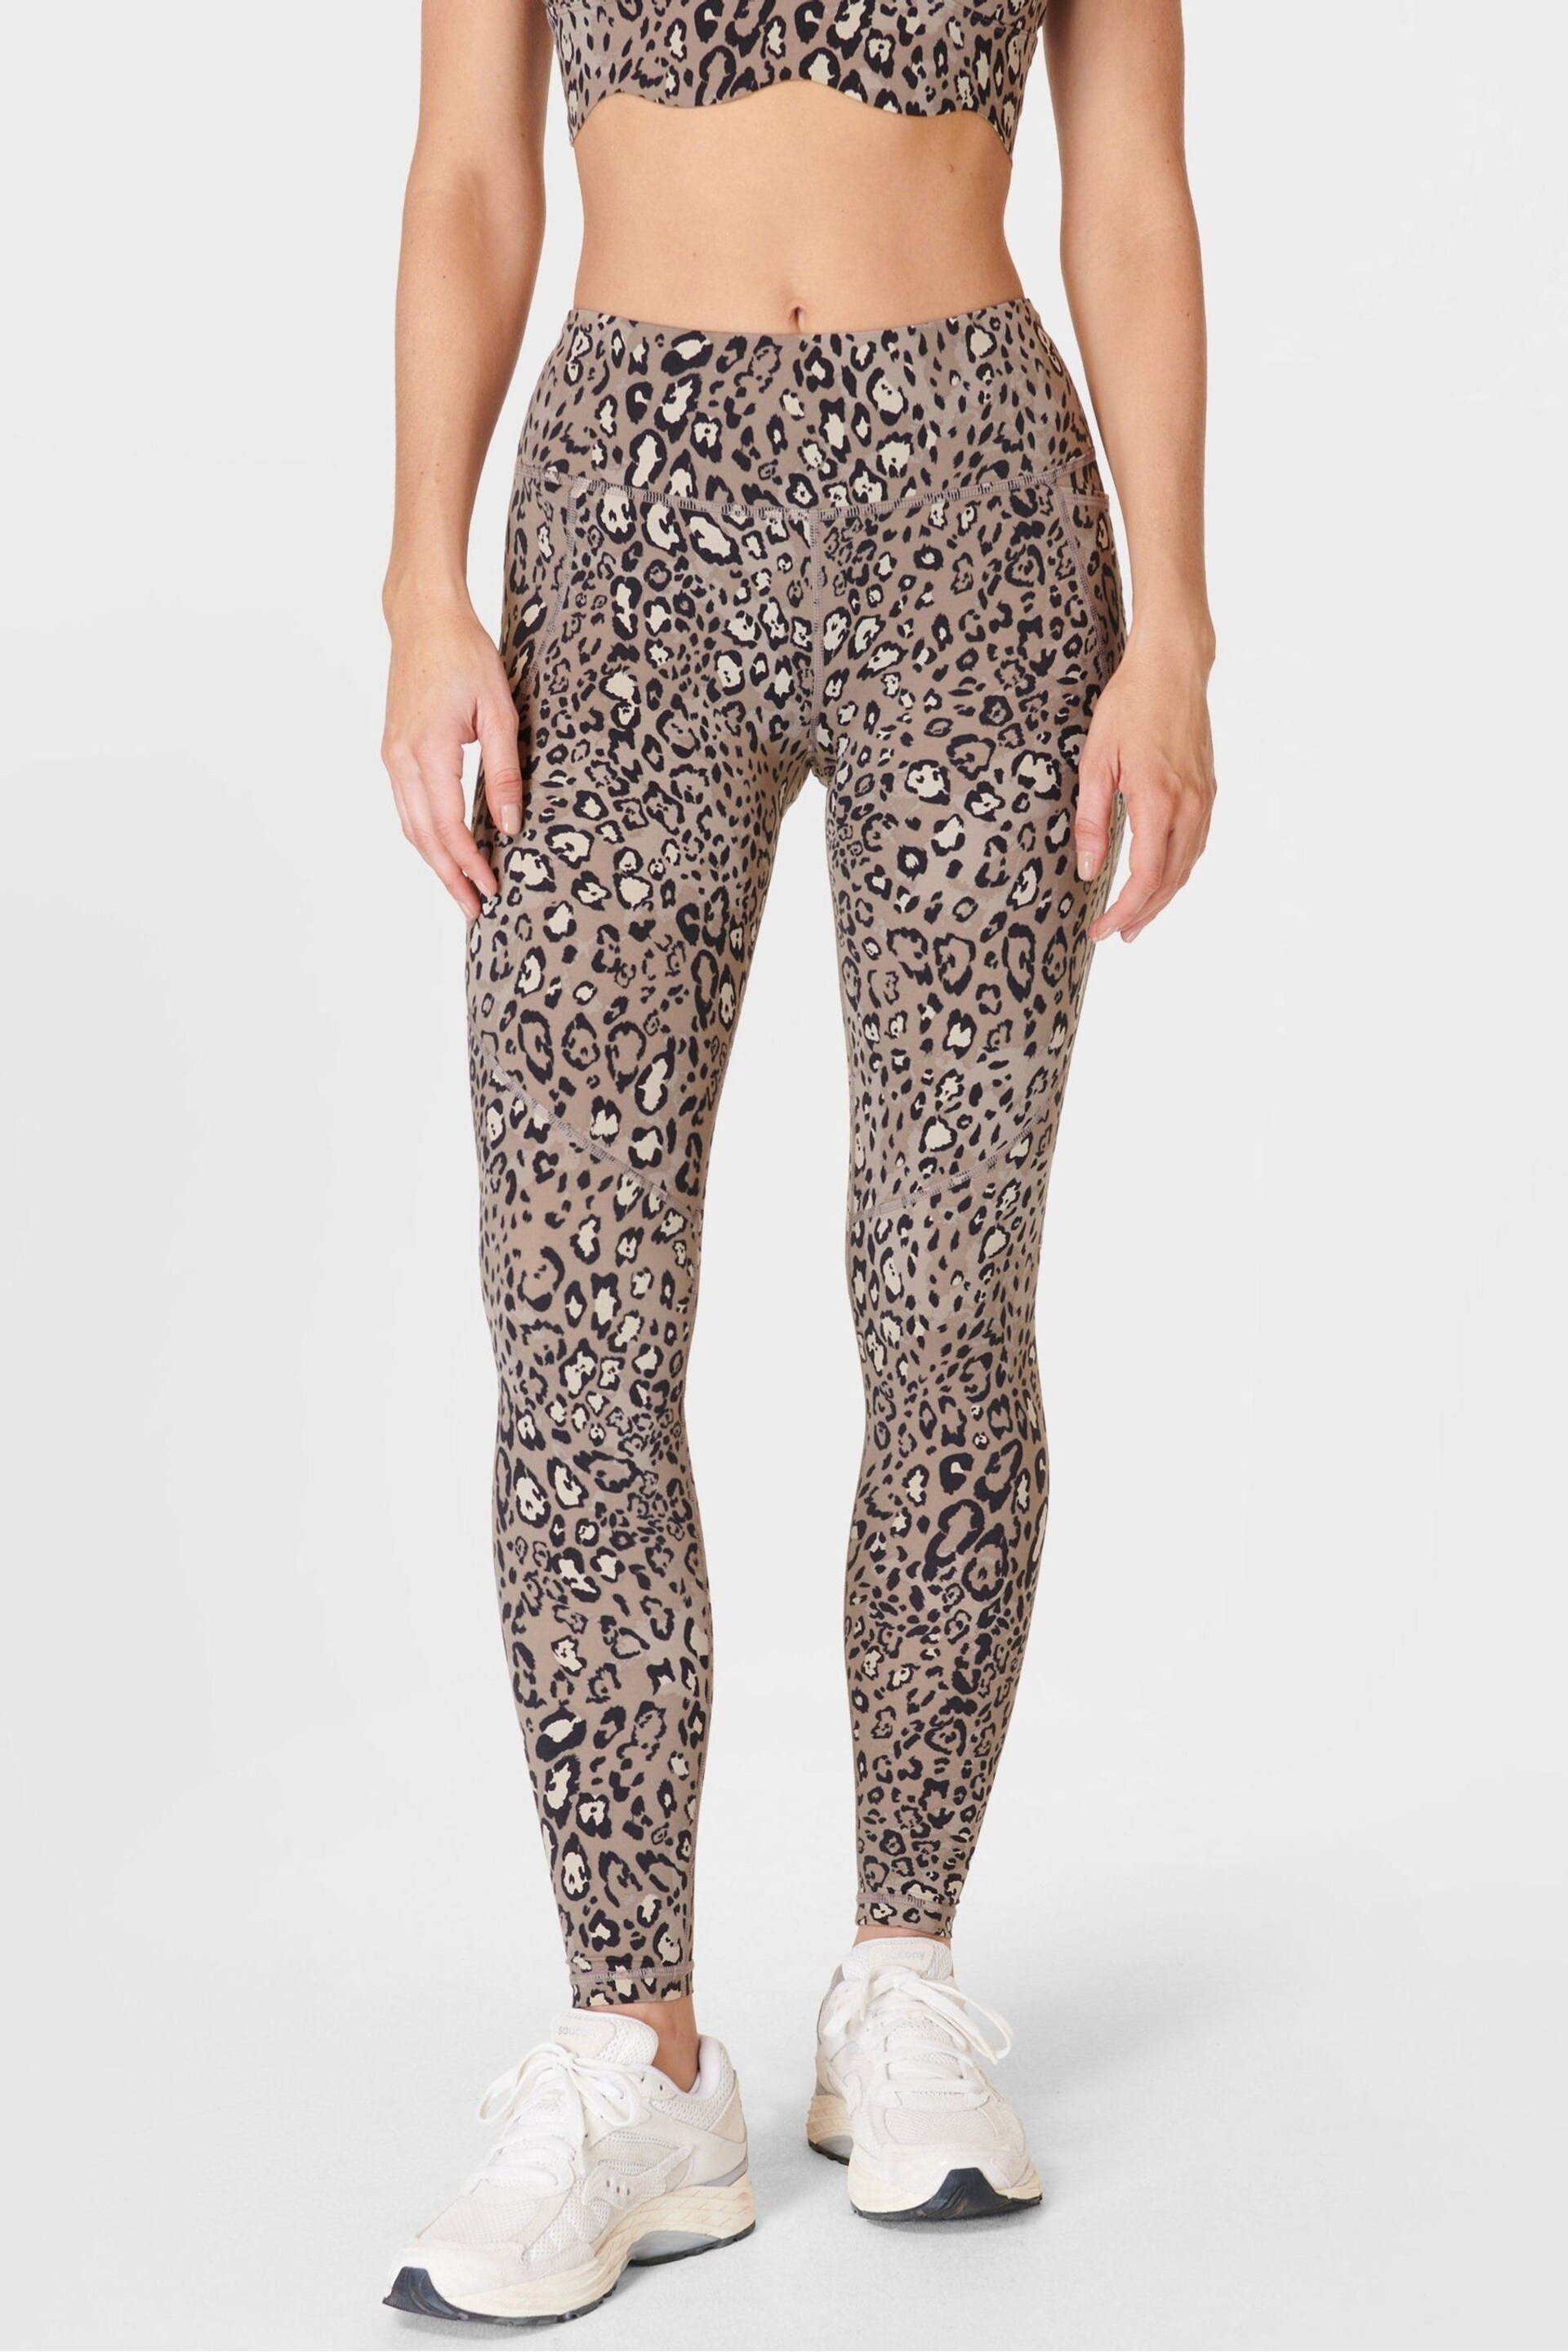 Sweaty Betty Brown Luxe Leopard Print Full Length Power Workout Leggings - Image 1 of 9